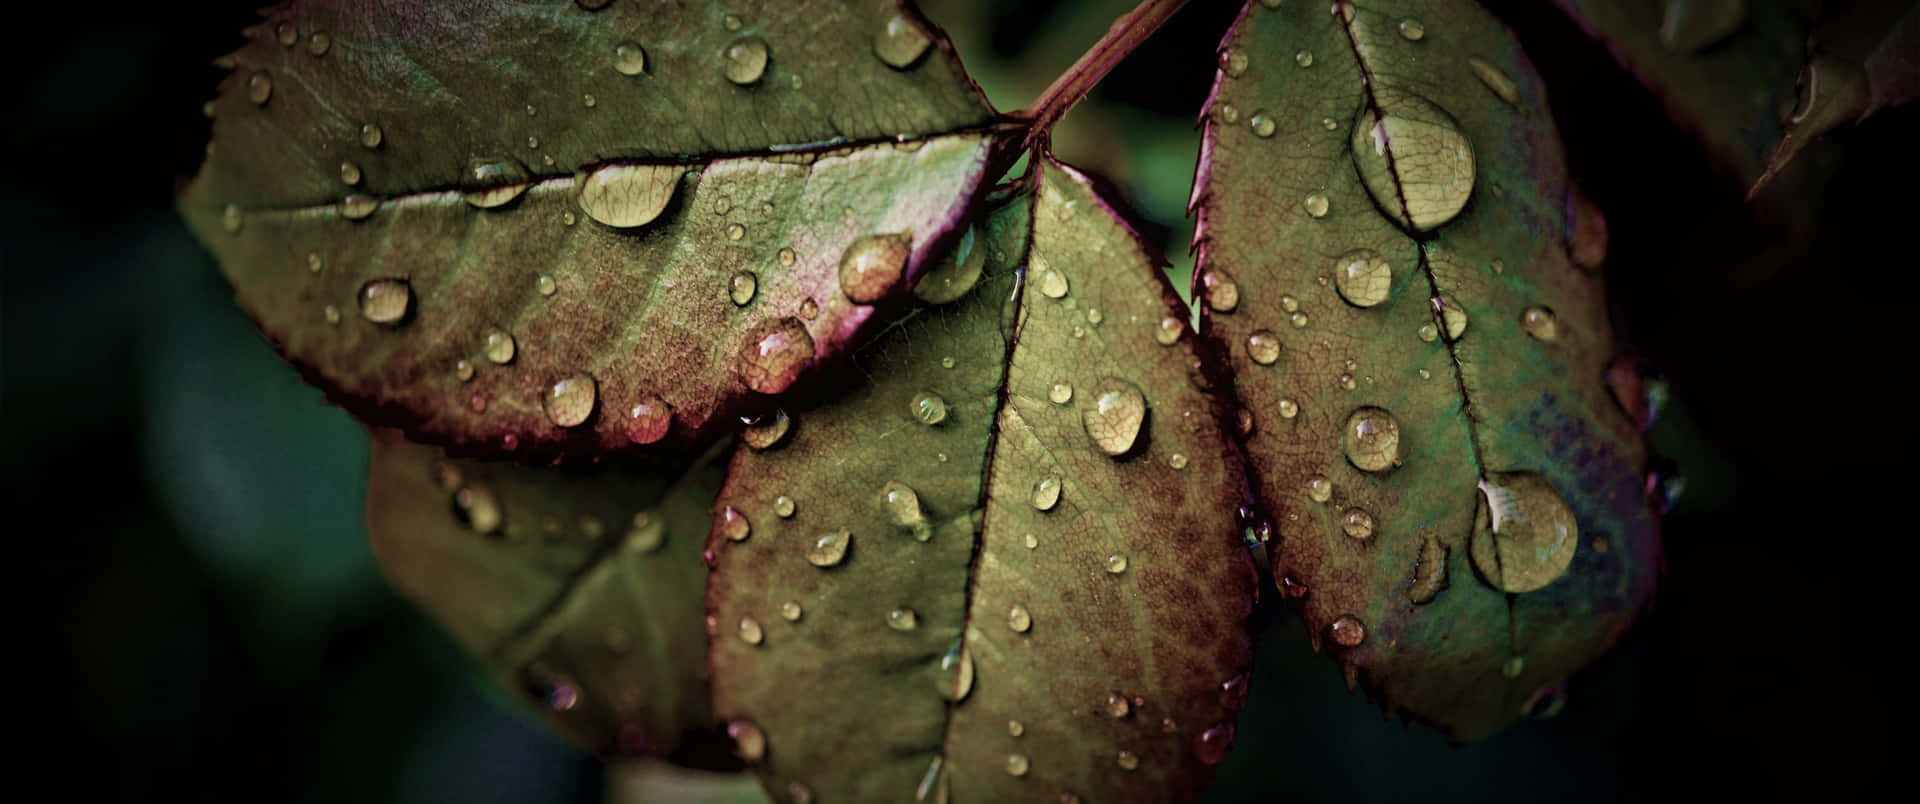 Get drenched with this rain-filled 4K wallpaper. Wallpaper